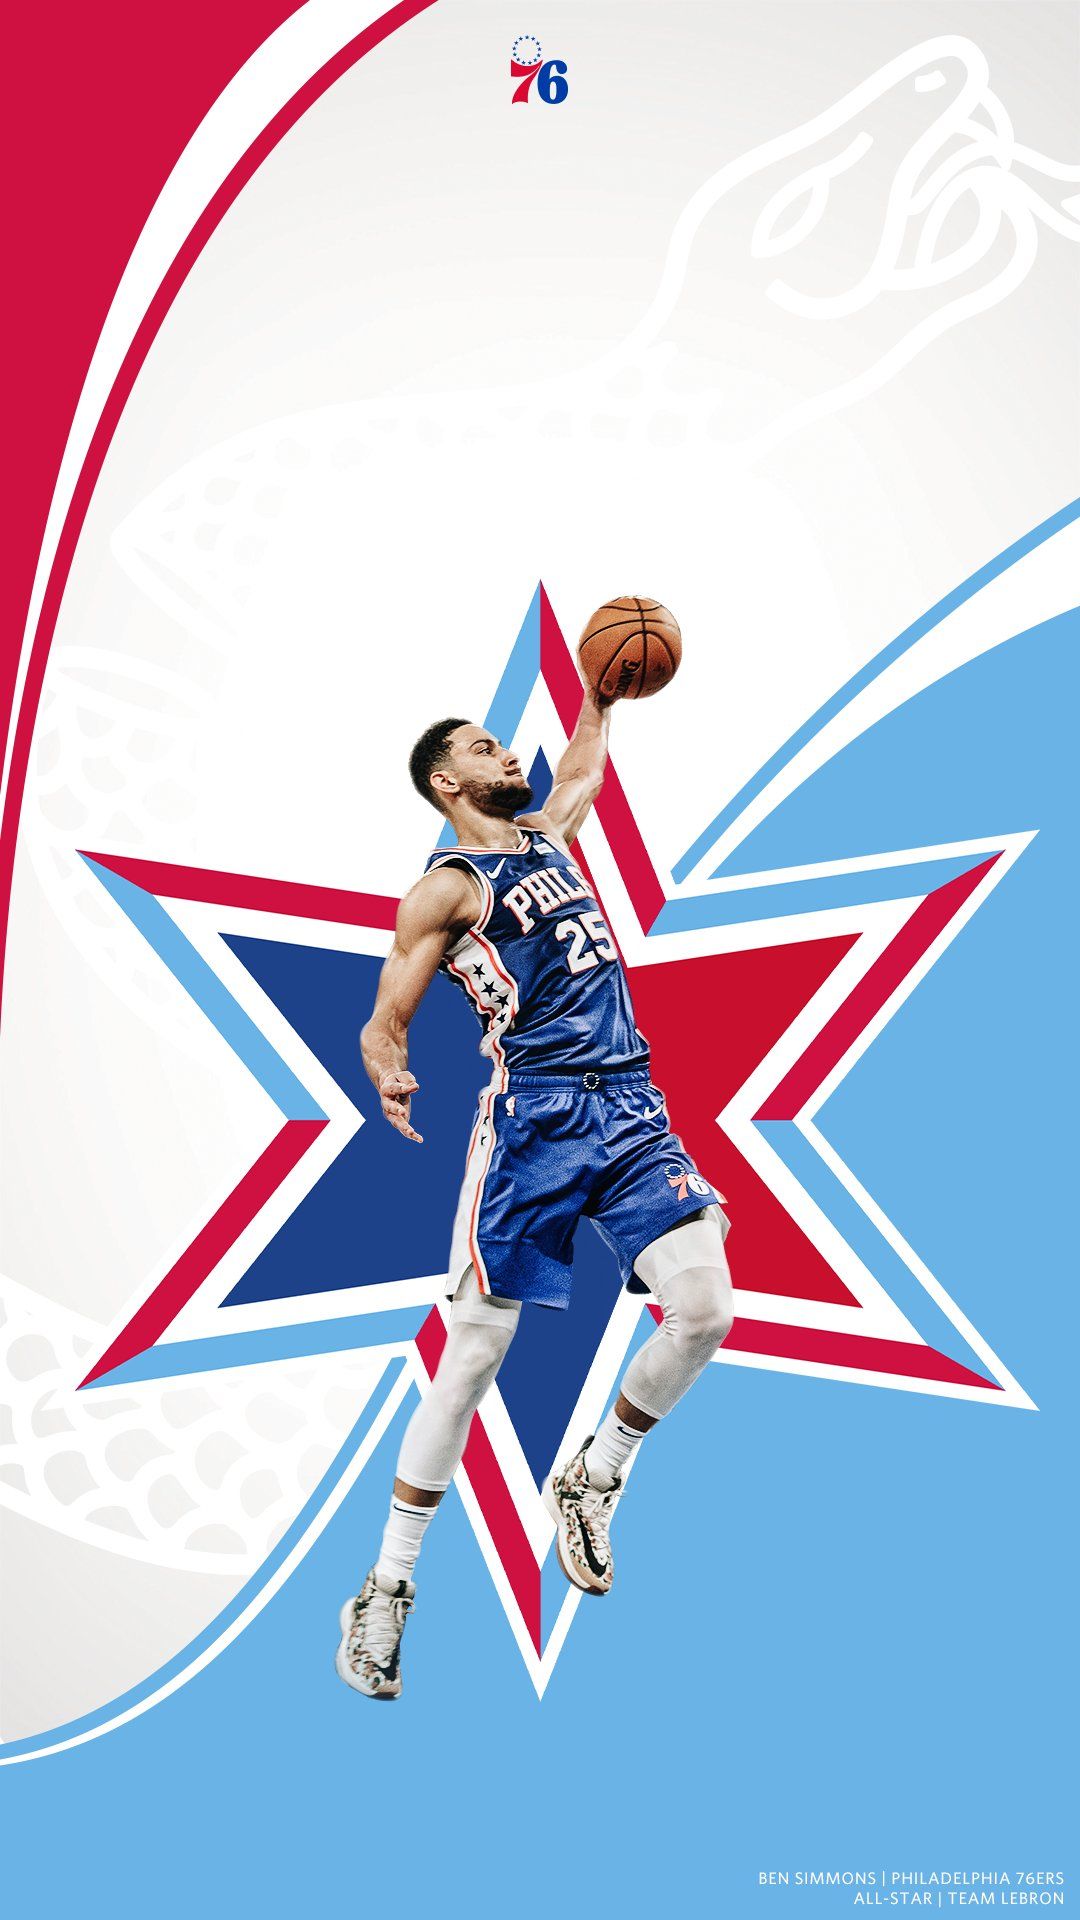 76ers iPhone Wallpapers  Wallpaper Cave